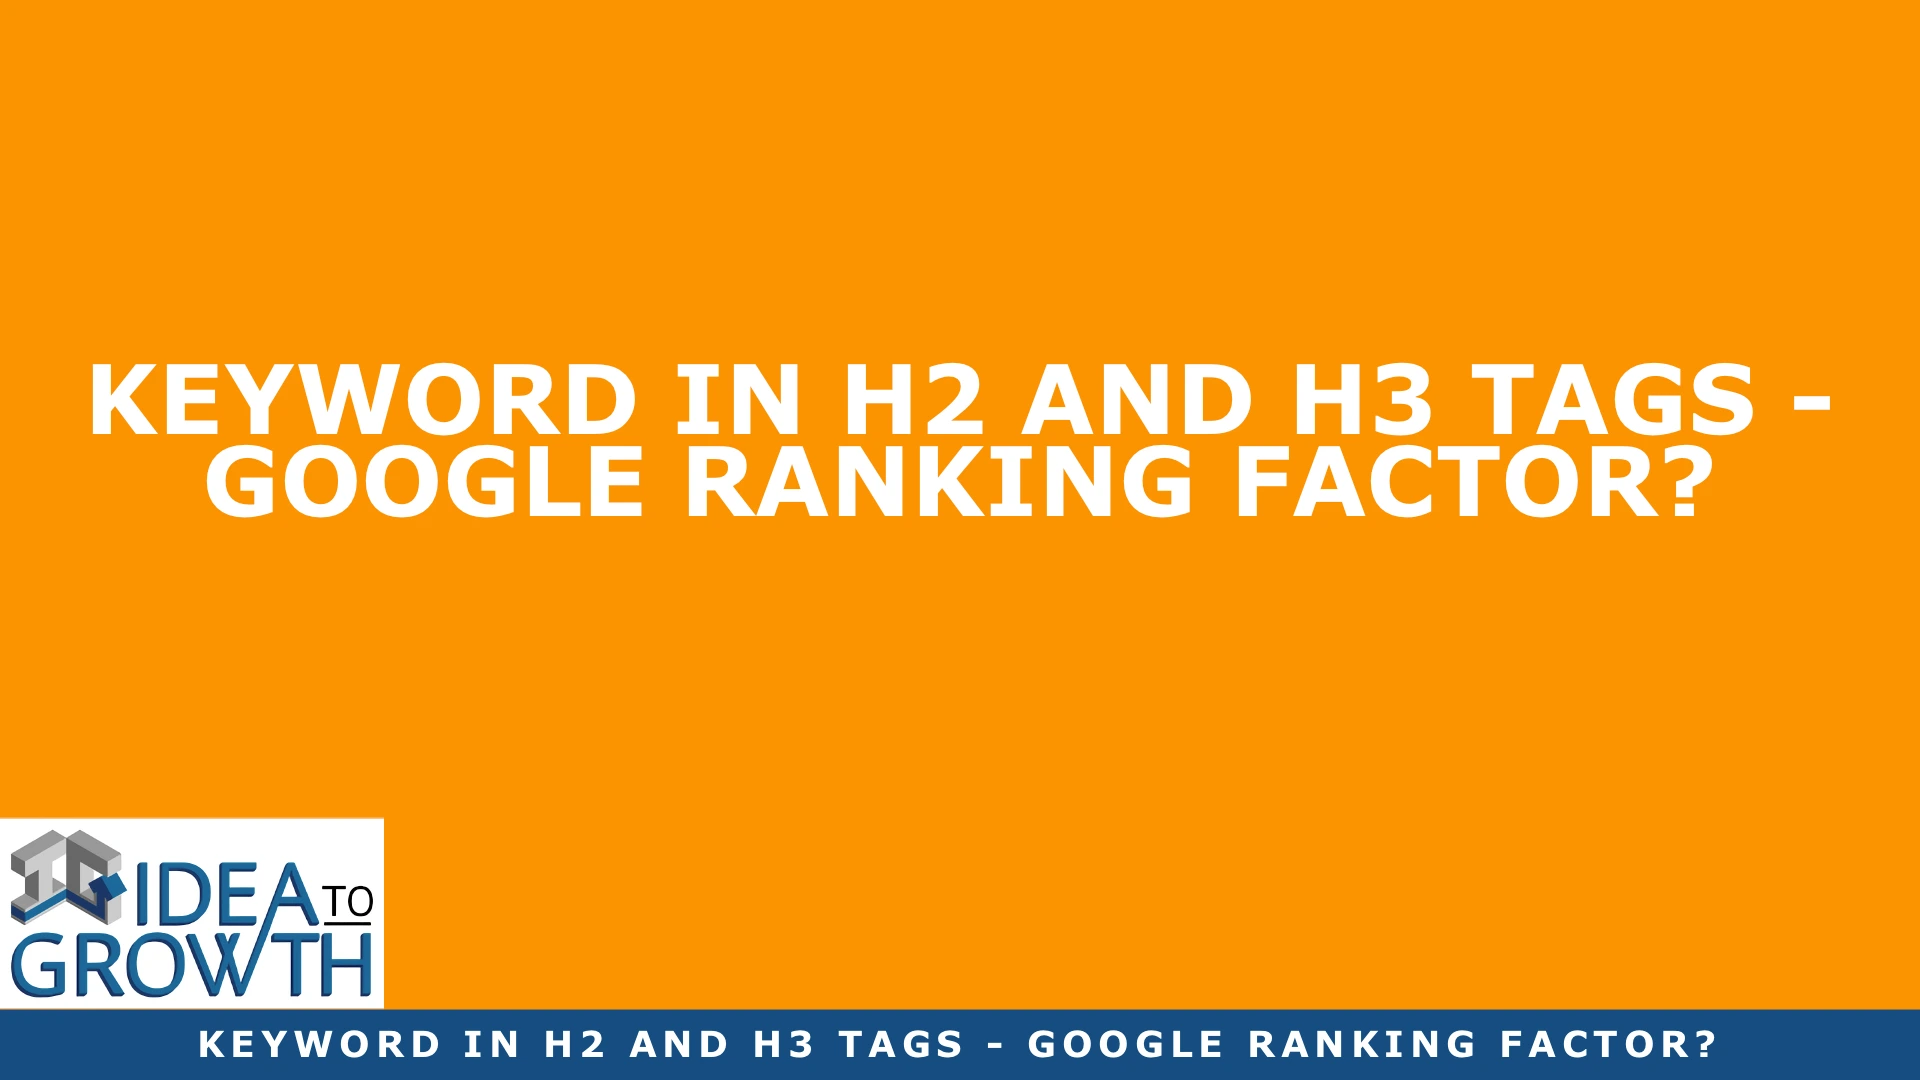 KEYWORD IN H2 AND H3 TAGS - GOOGLE RANKING FACTOR?